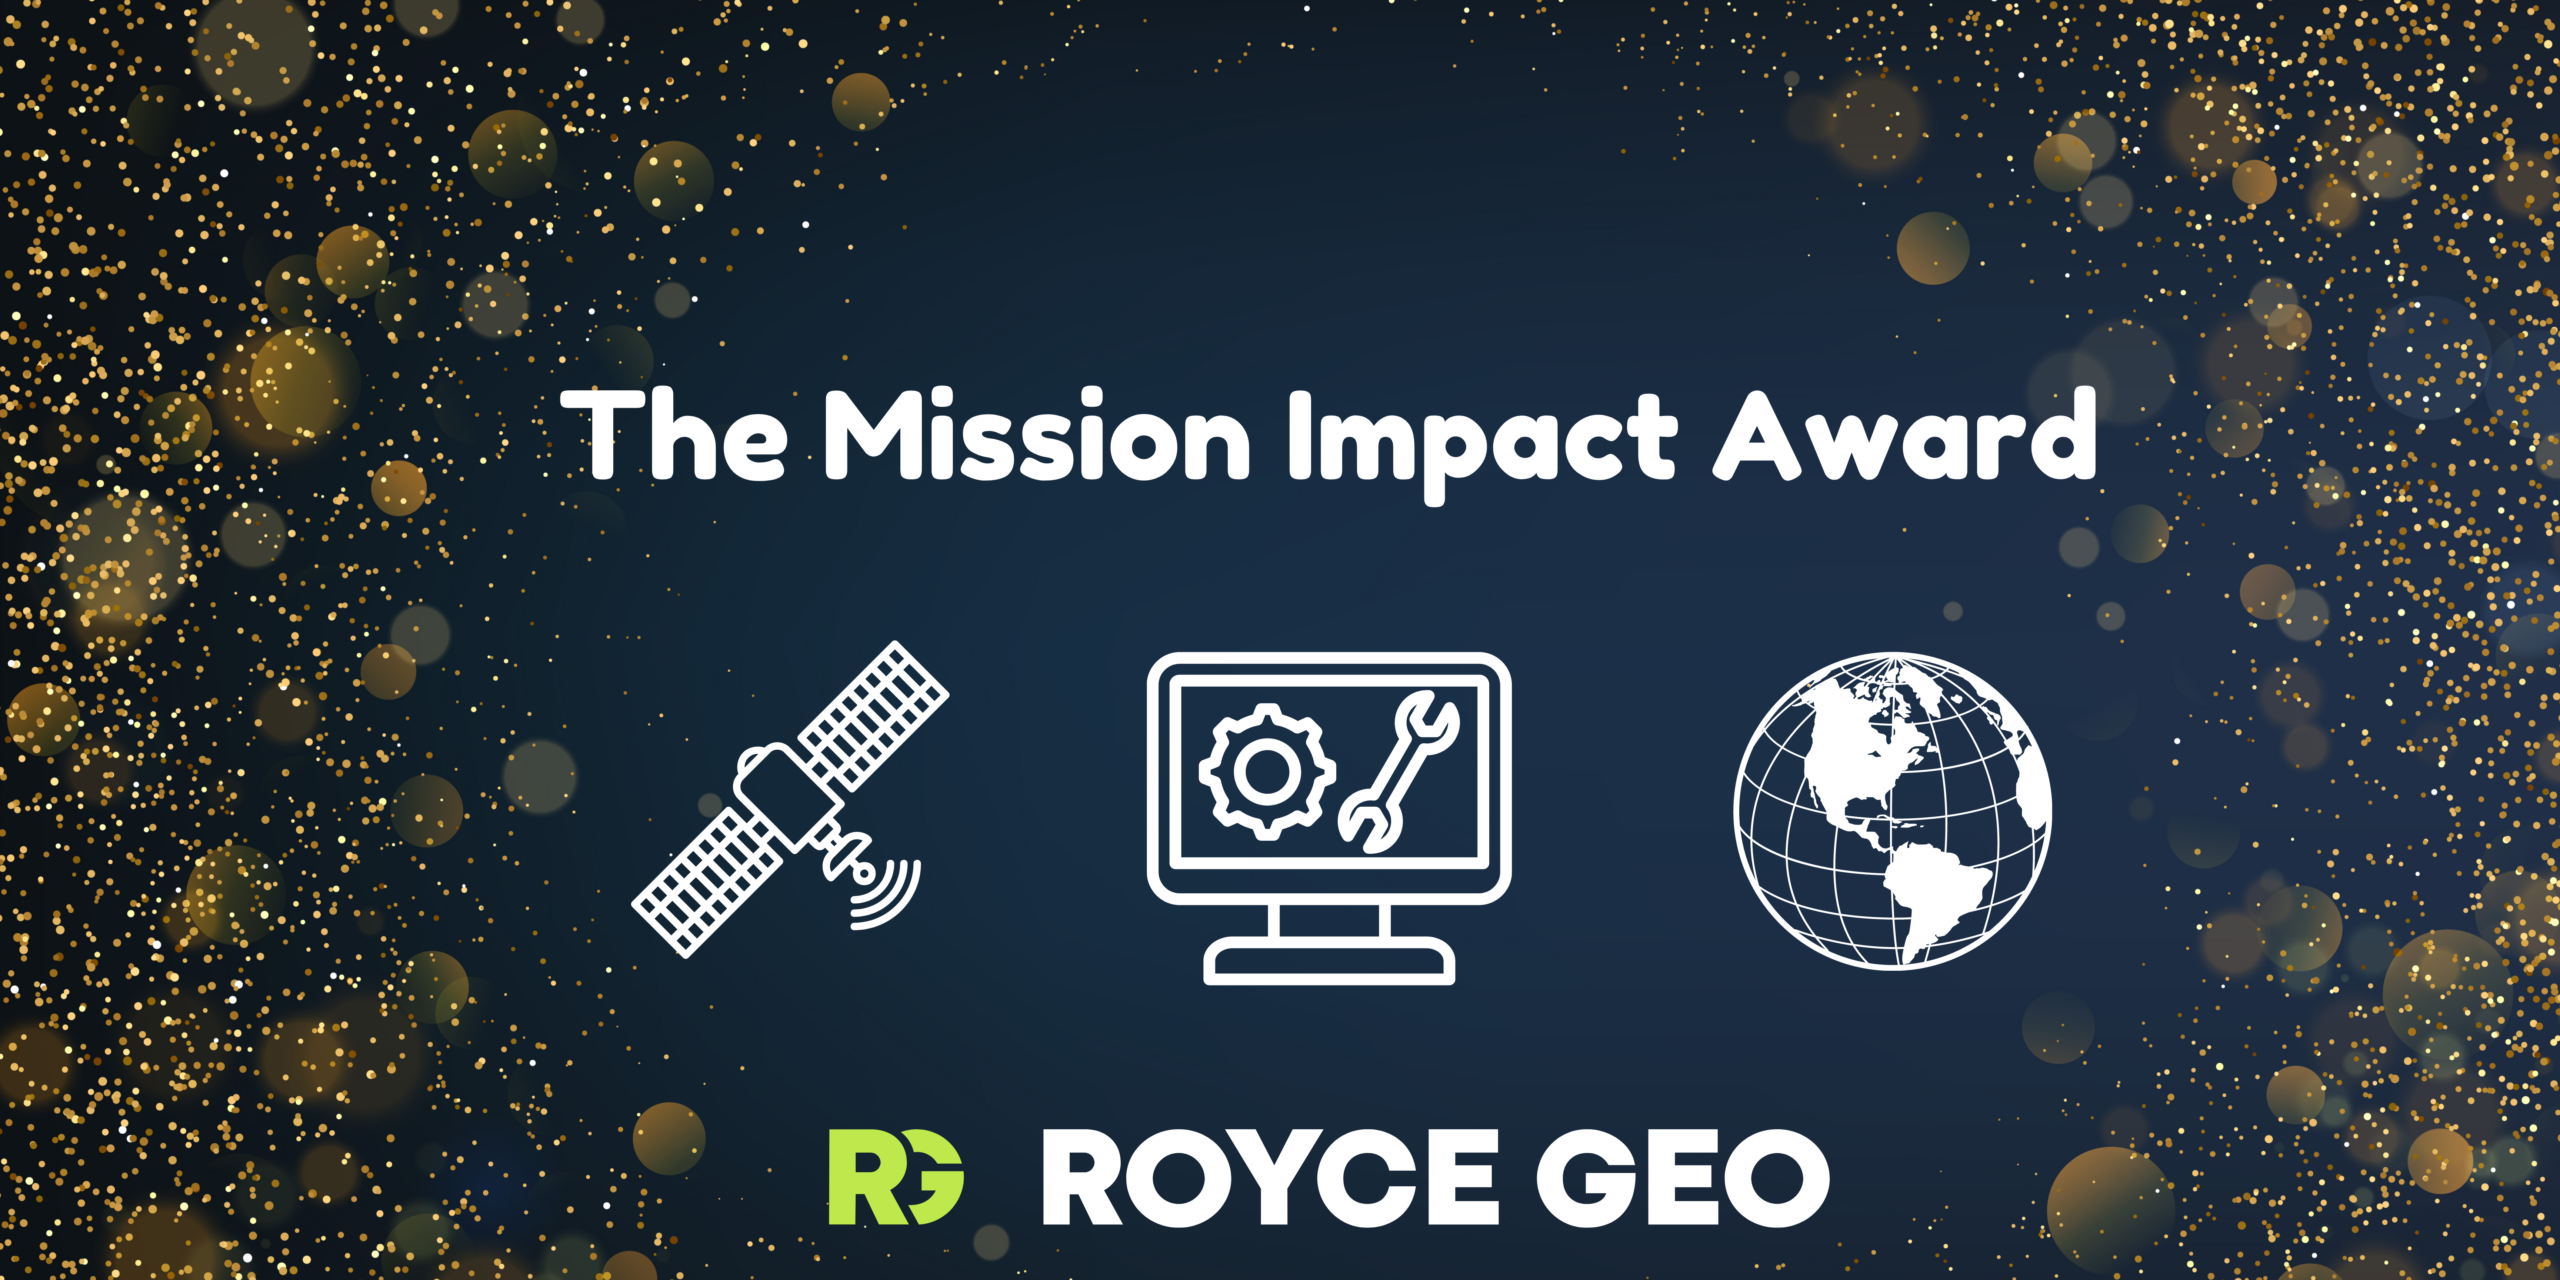 A graphic which depicts the Royce Geo Mission Impact Award